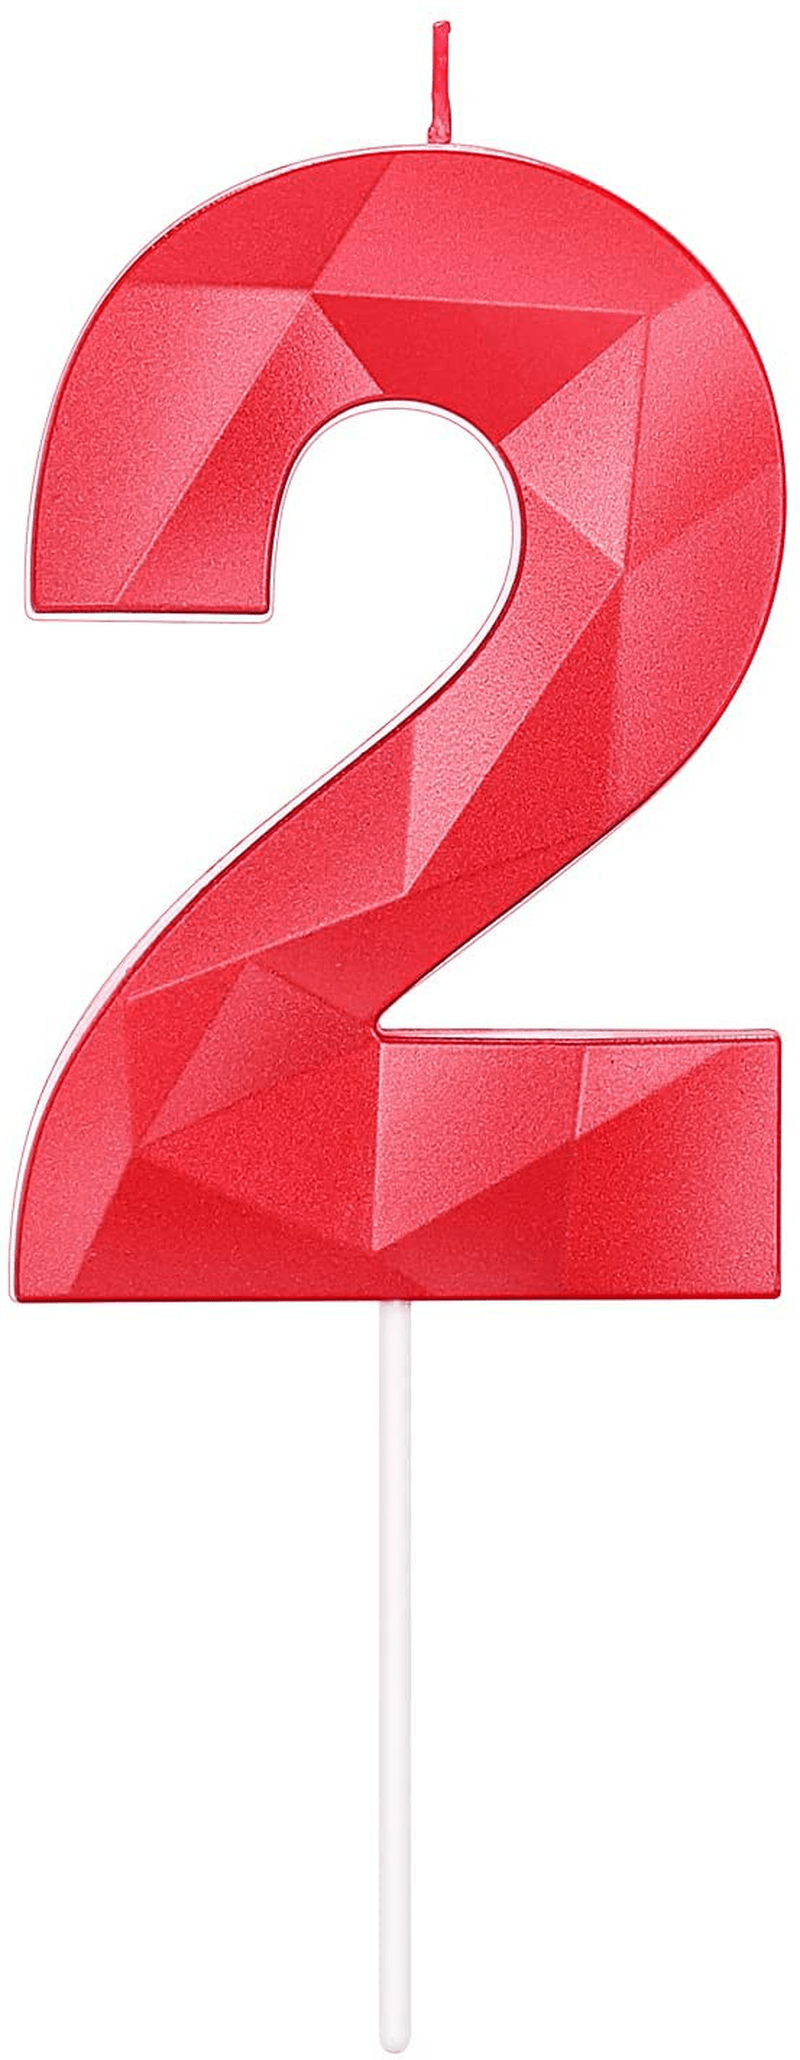 2.76 Inches 3D Diamond Shape Birthday Cake Candle Number 2 ,Red Color Happy Birthday Cake Cupcake Toppers Decoration for Wedding Anniversary,Party Celebration,Family Baking(RED Number 2) Home & Garden > Decor > Home Fragrances > Candles MEIMEI Red number 2 